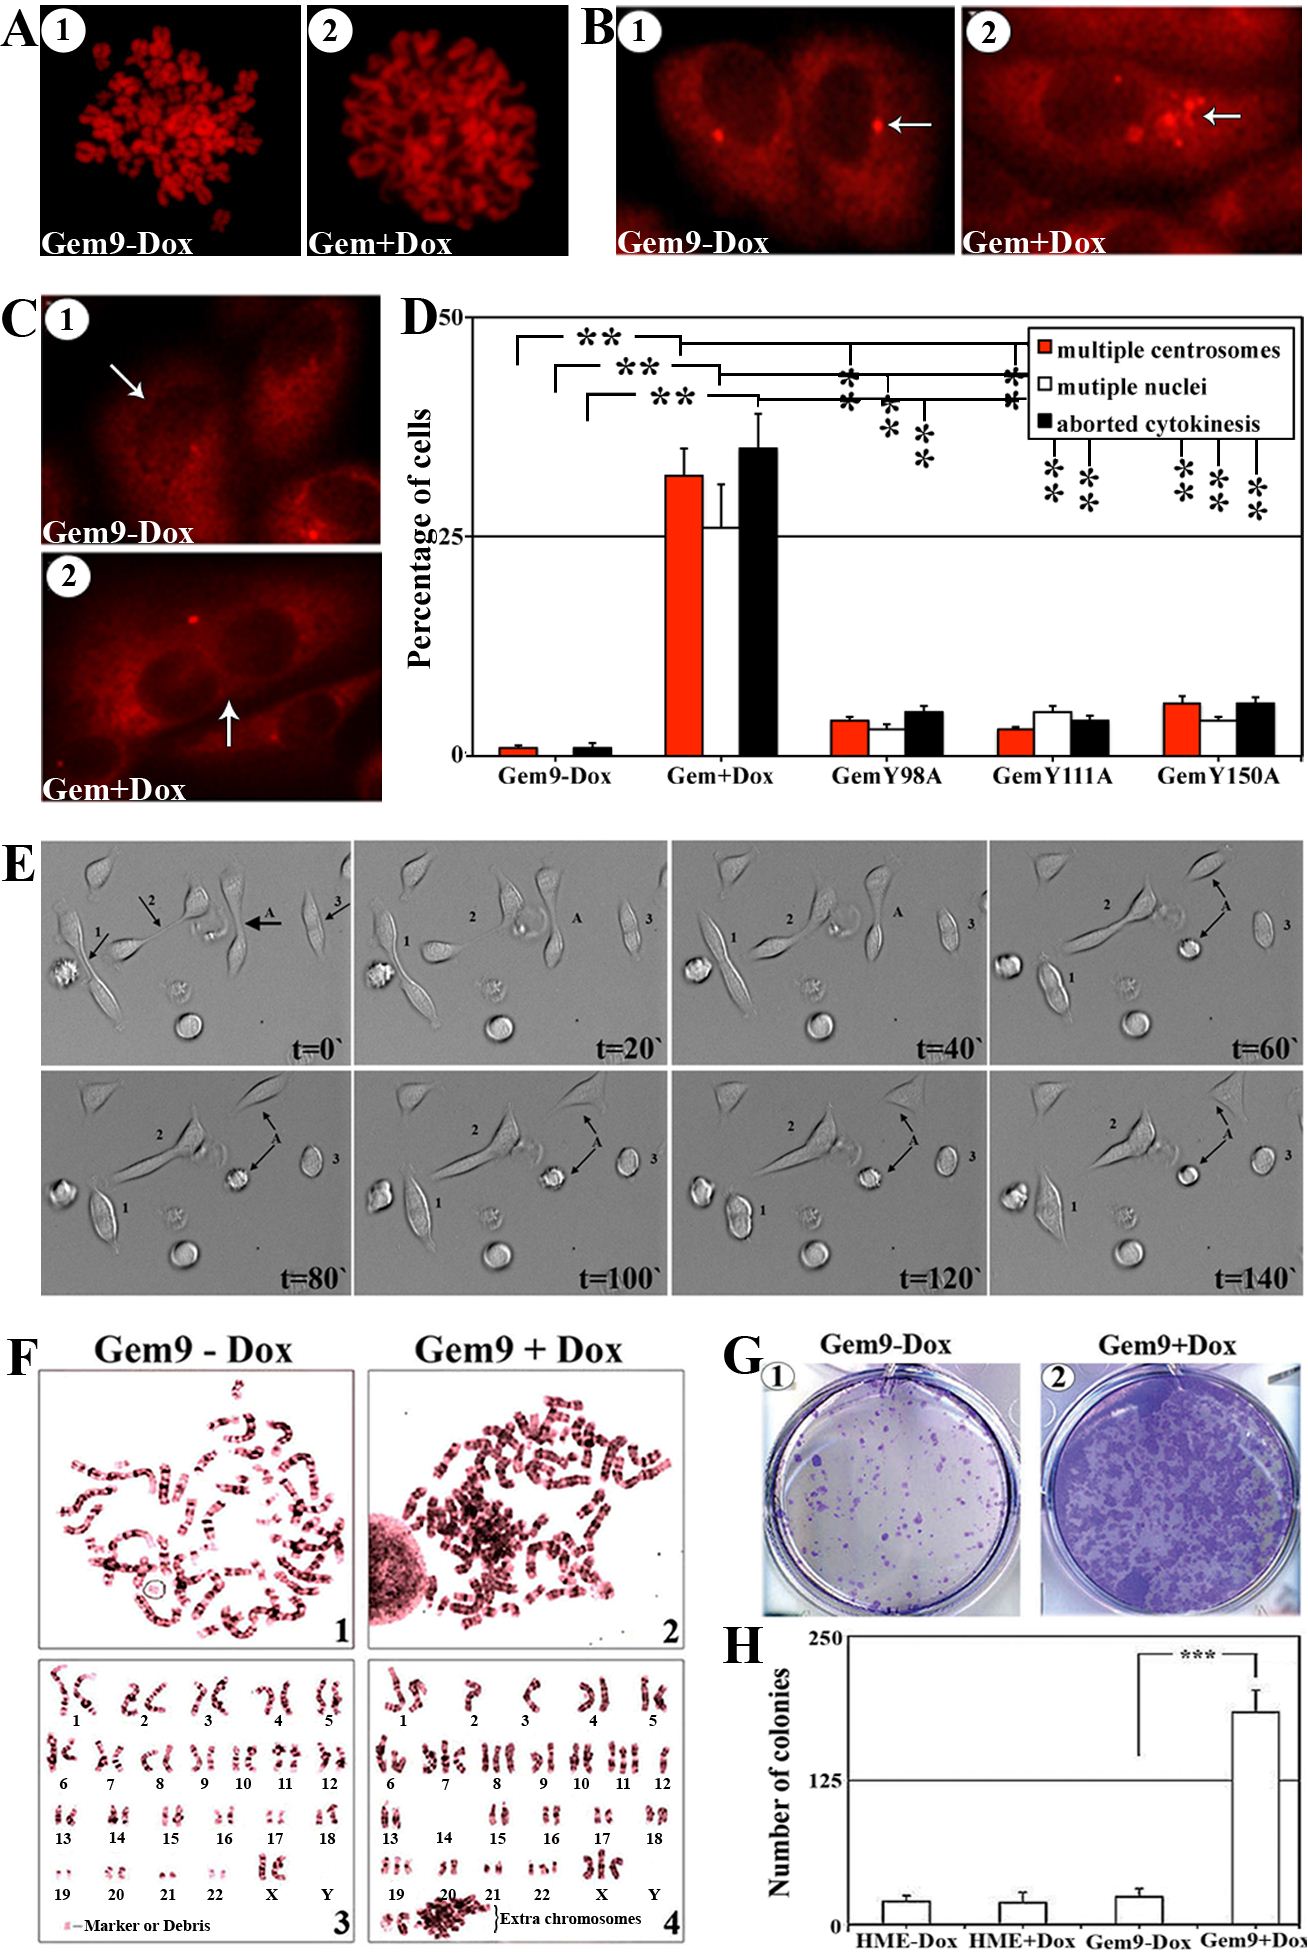 The effect of geminin overexpression on chromosome condensation, centrosome number, cytokinesis, ploidy and transformation in HME cells,